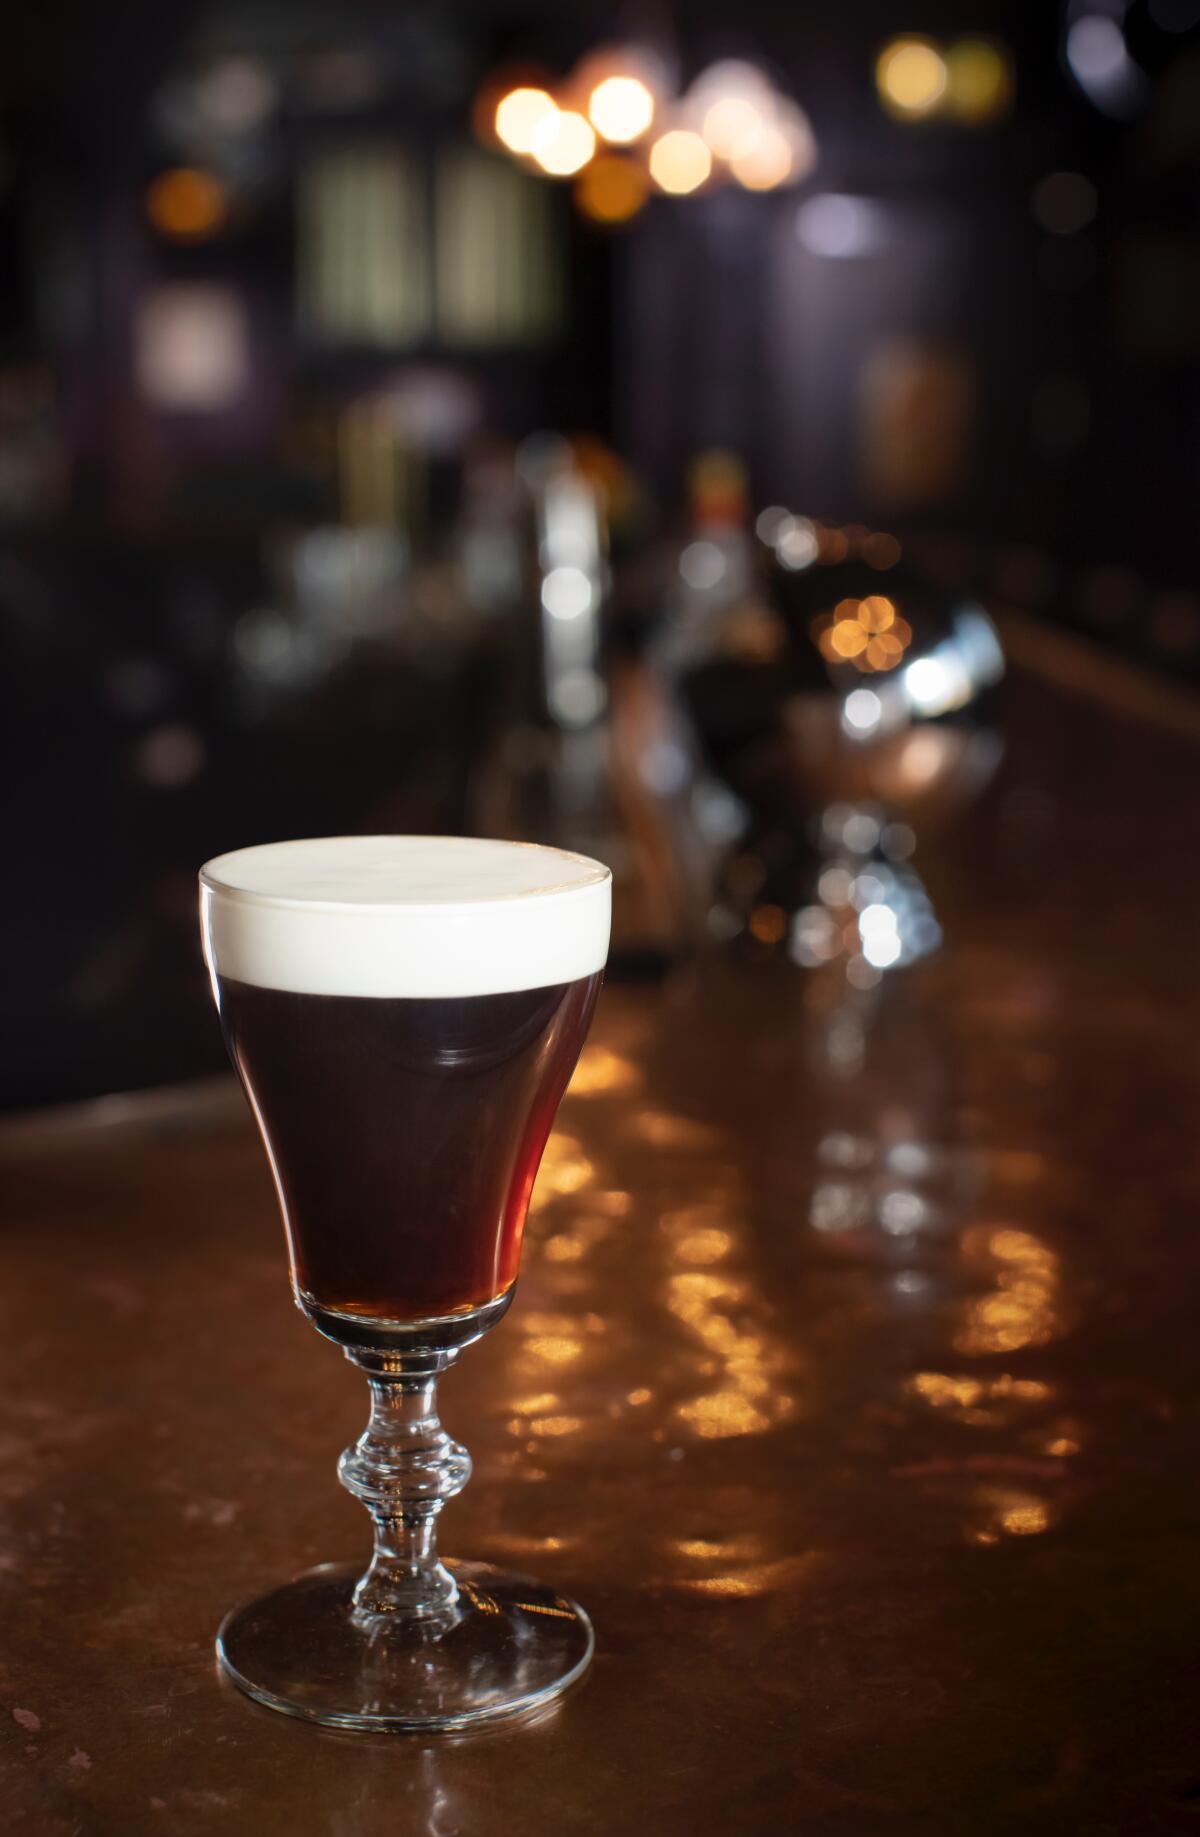 Irish coffee in a tulip glass with a white foamy head, sitting on a wooden bar.